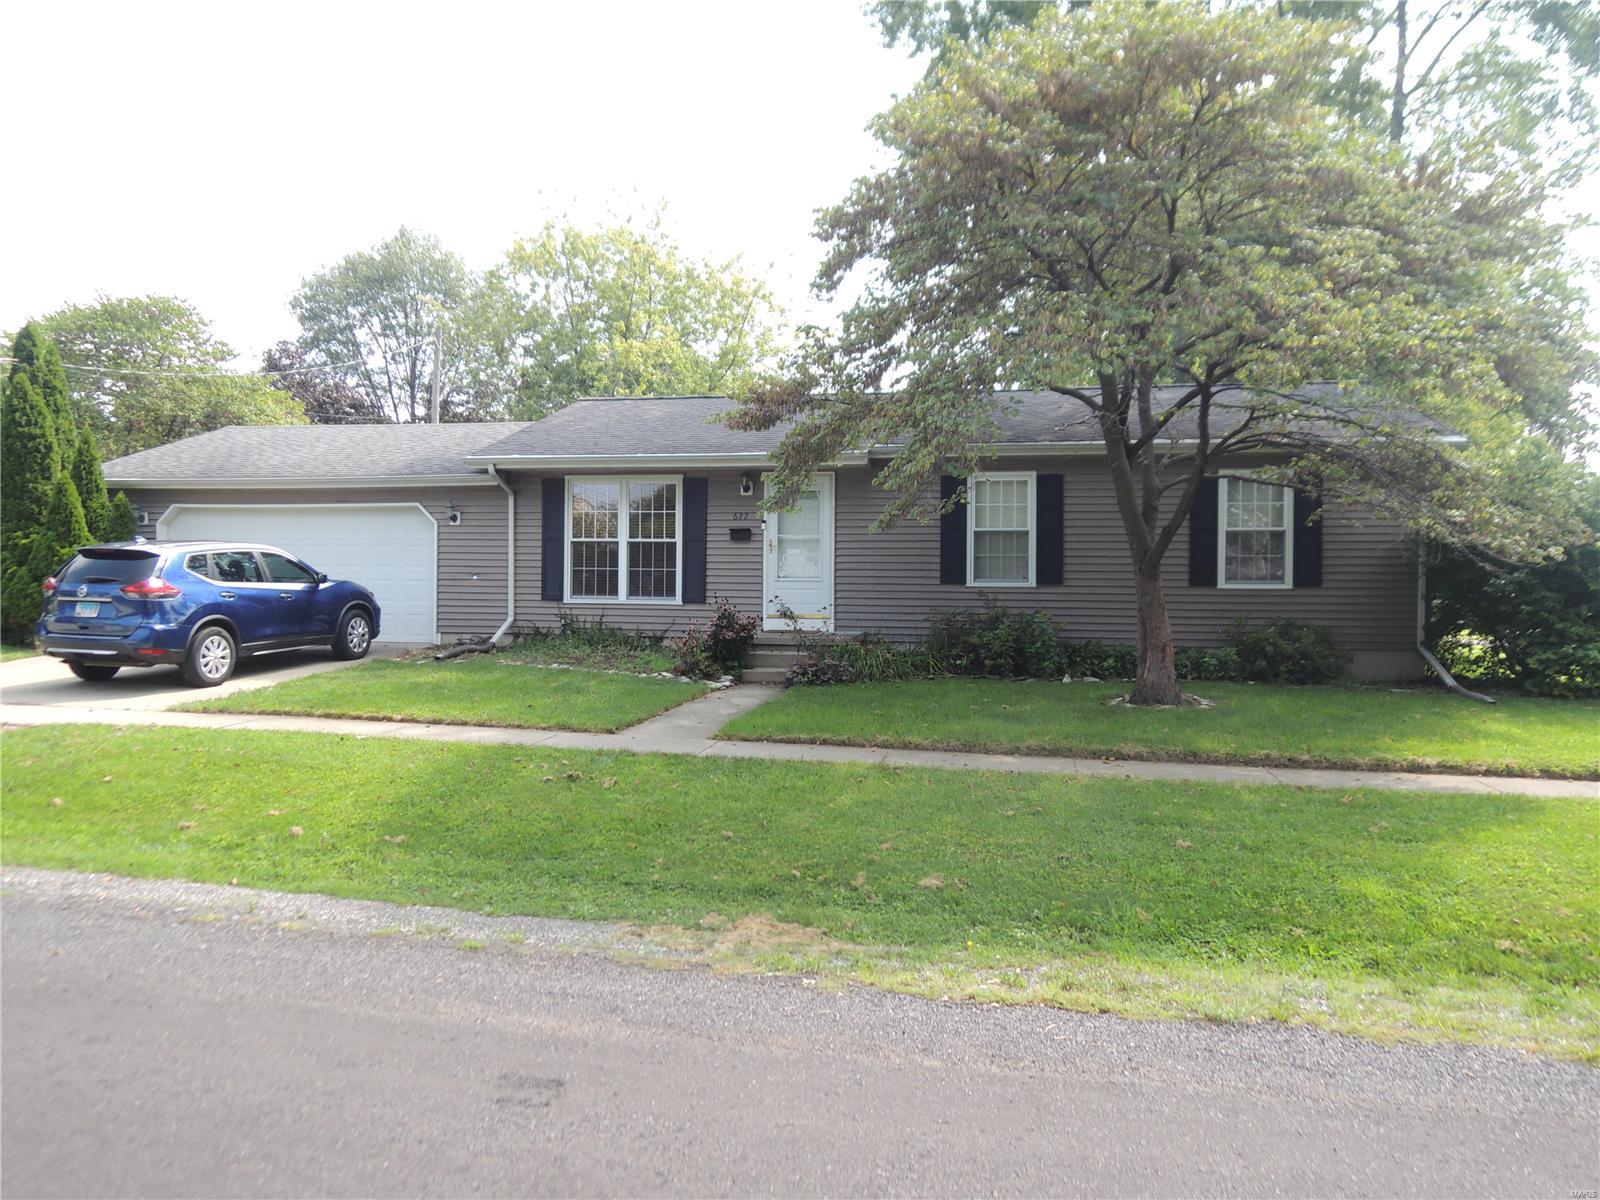 3 Bedroom,  622 Charles Avenue Greenville, IL